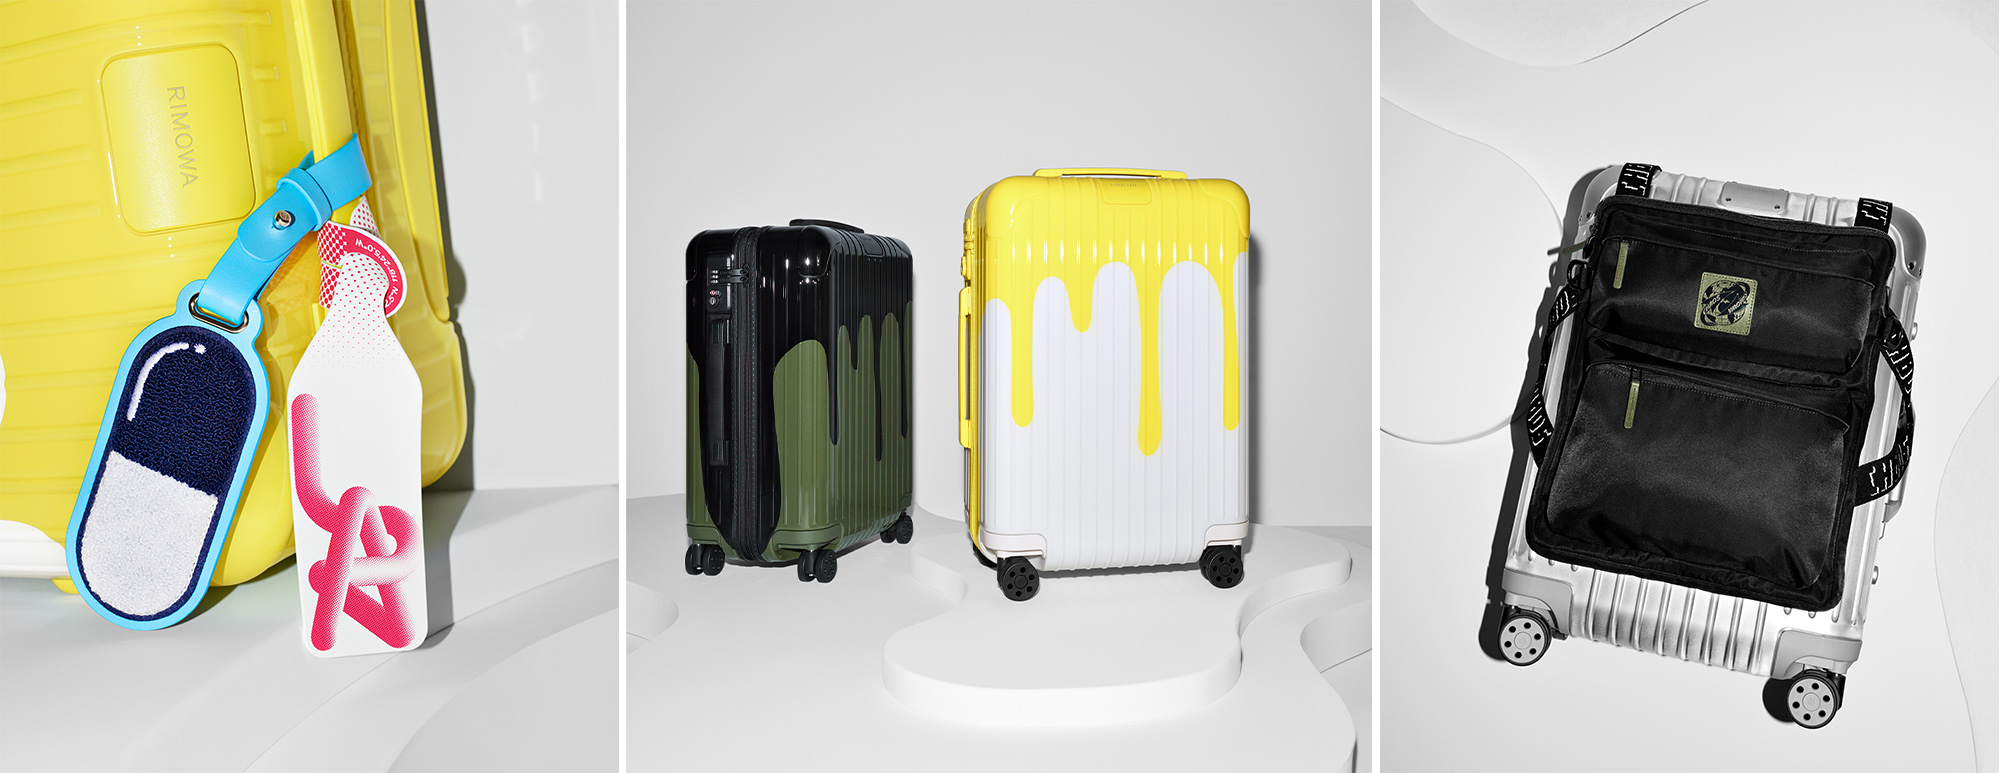 RIMOWA x Chaos puts dripping paint graphics on your beloved luggage